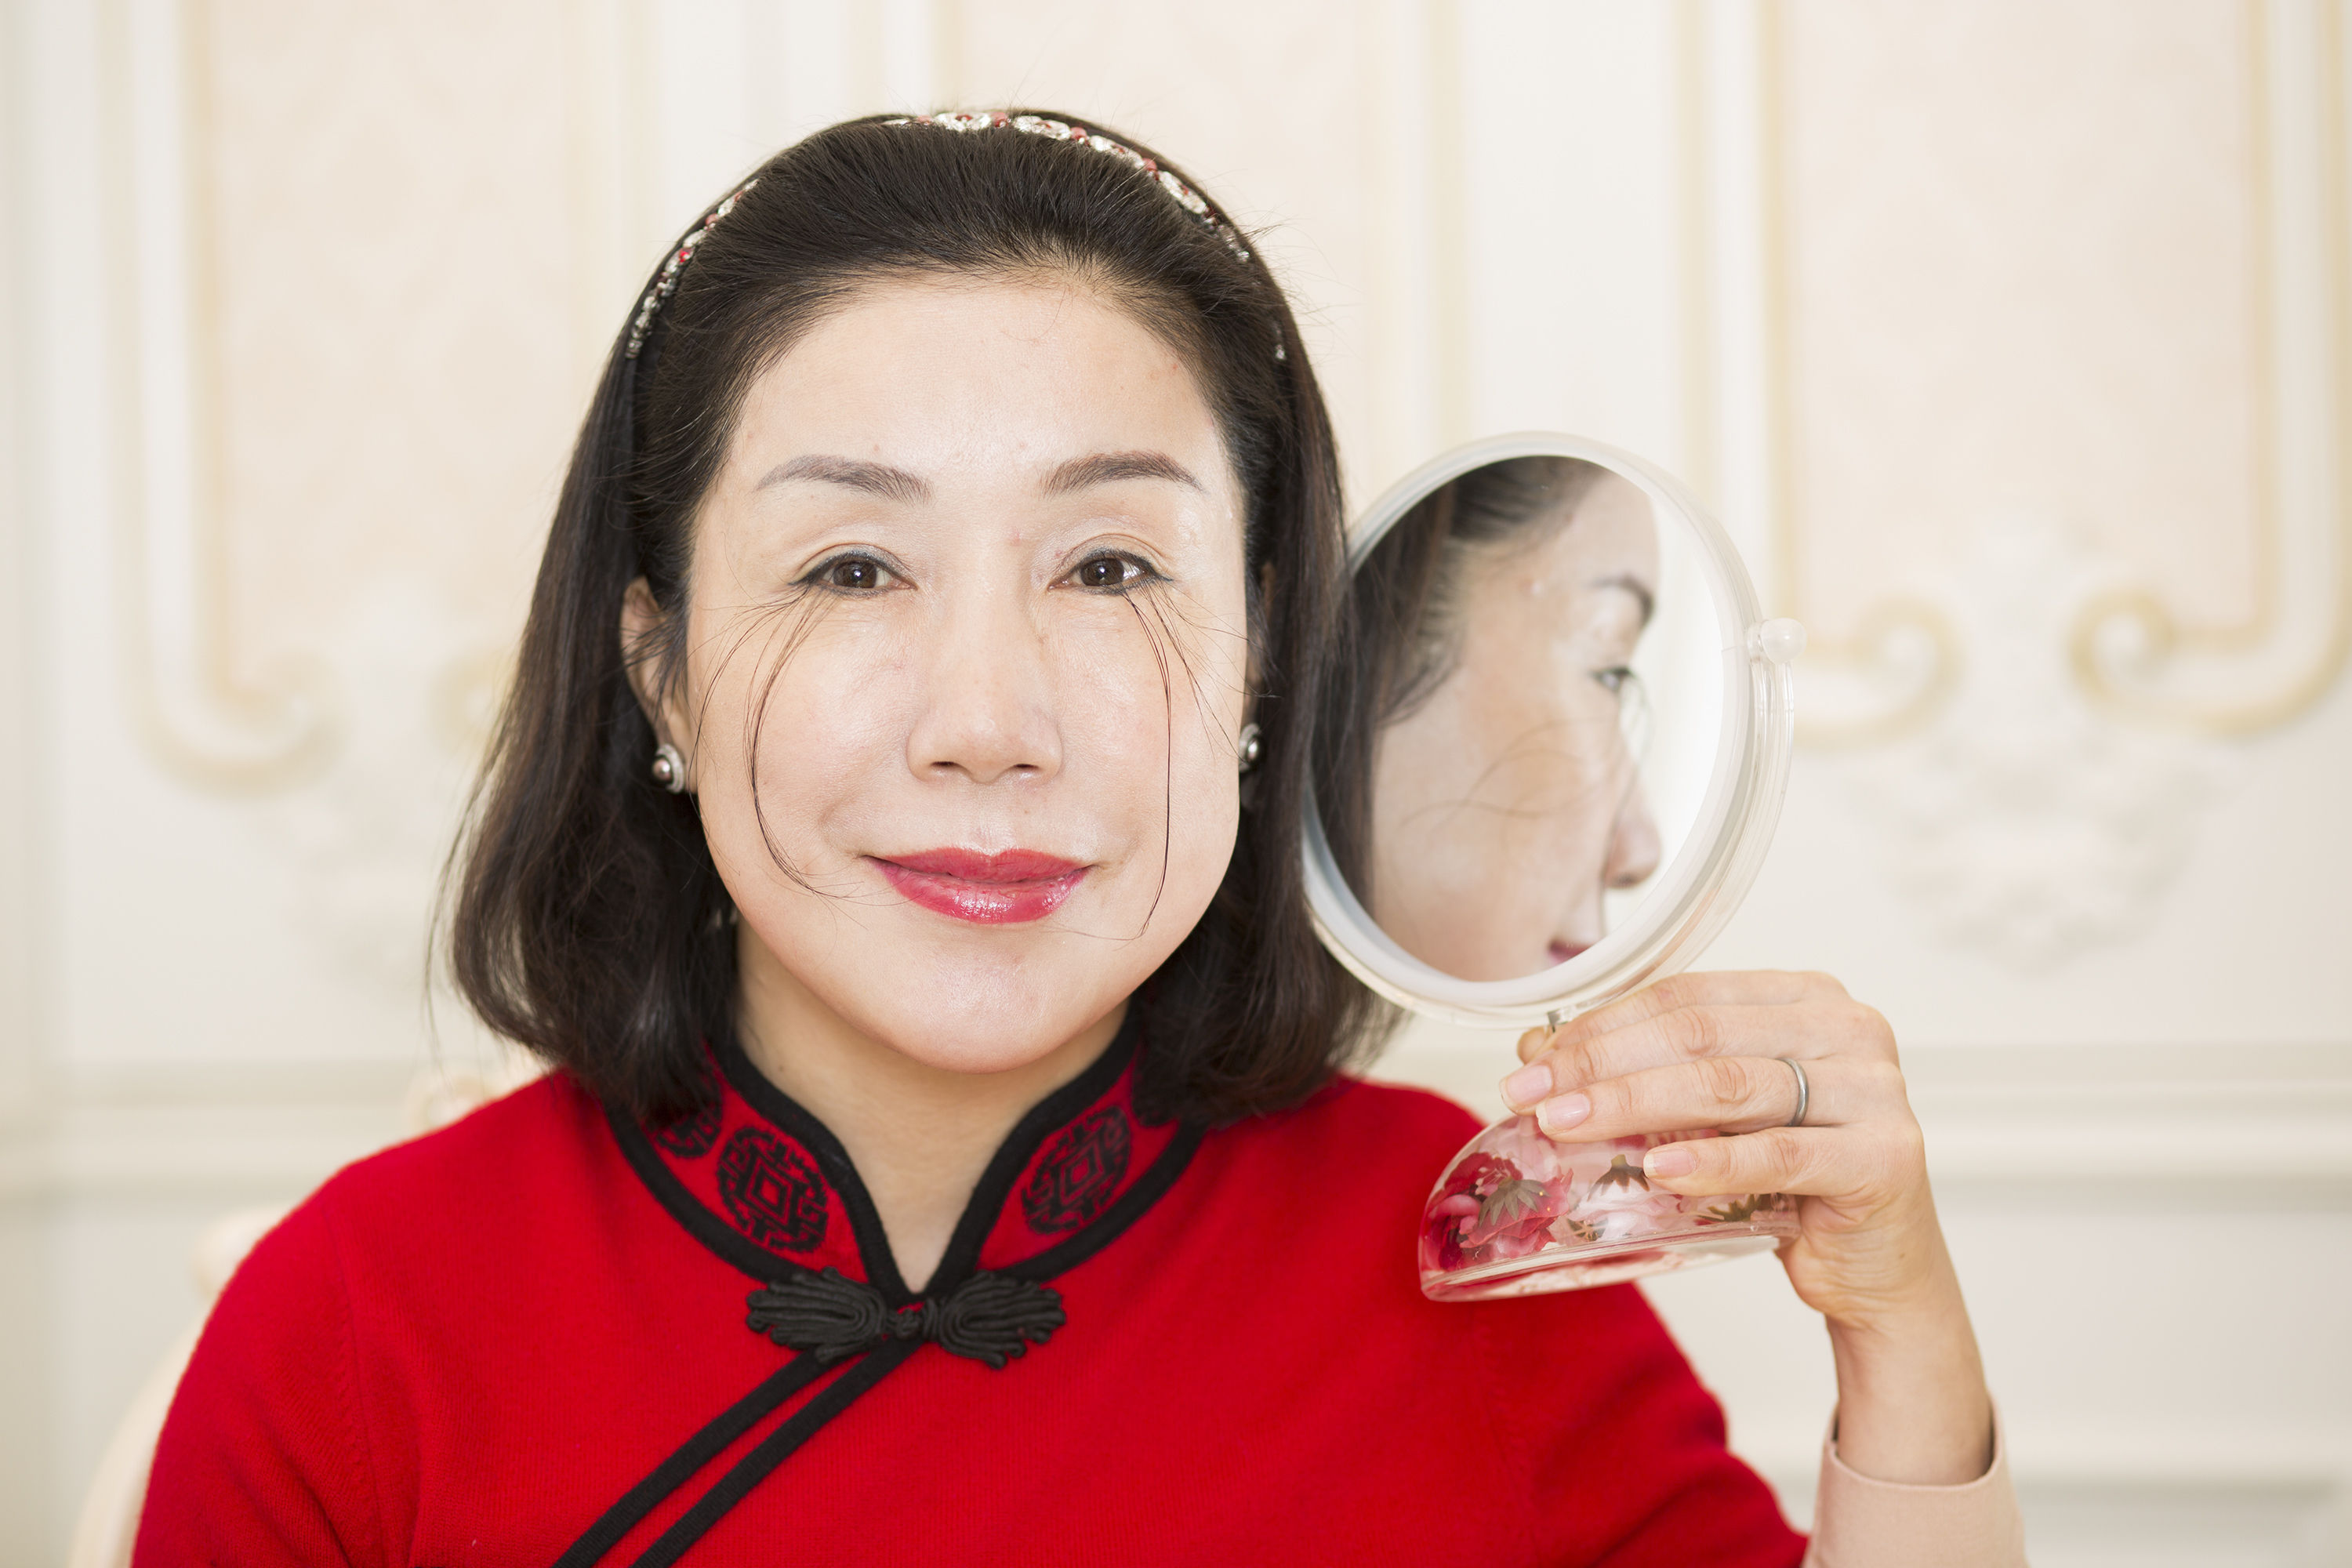 You Jianxia who has the record for the Longest Eyelash as she appears in the latest edition of Guinness World Records 2018. (Jonathan Browning/GWR/PA Wire)